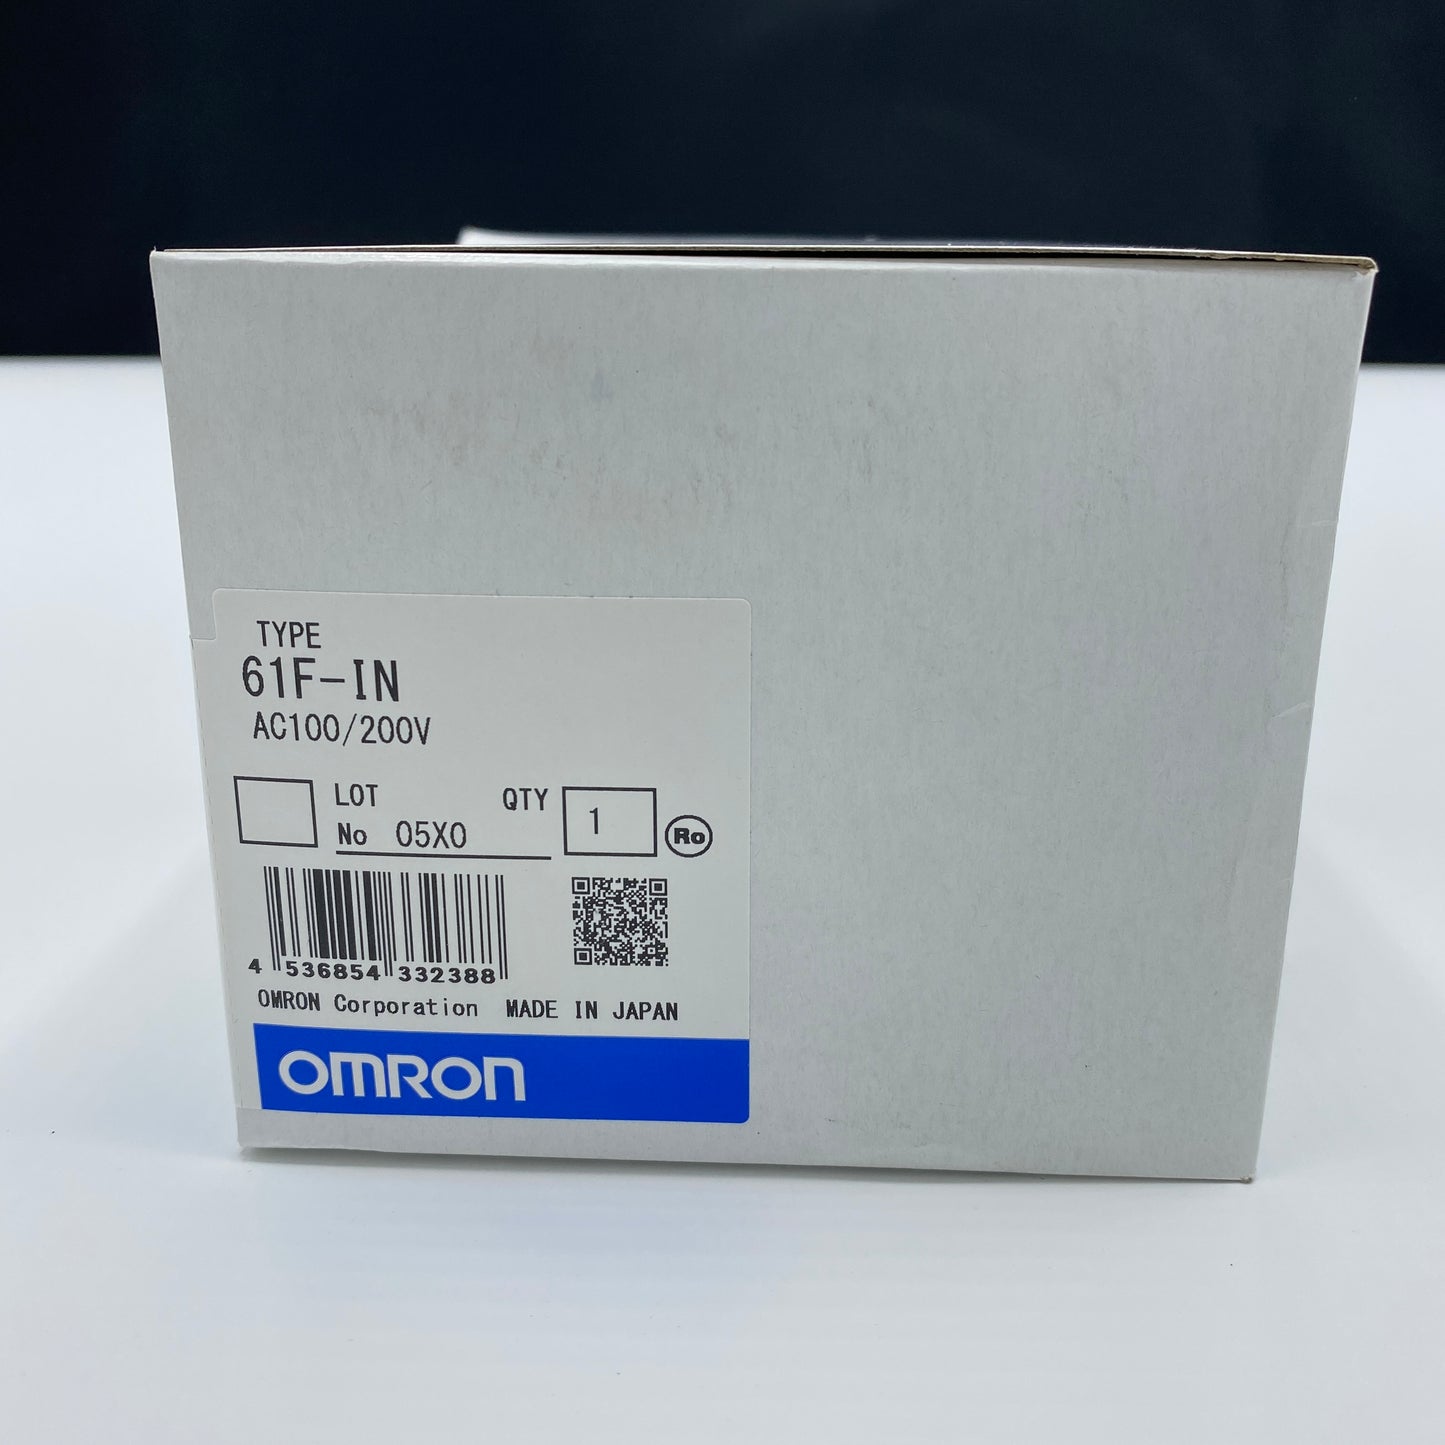 OMRON 61F-IN AC100/200V Floatless Switch